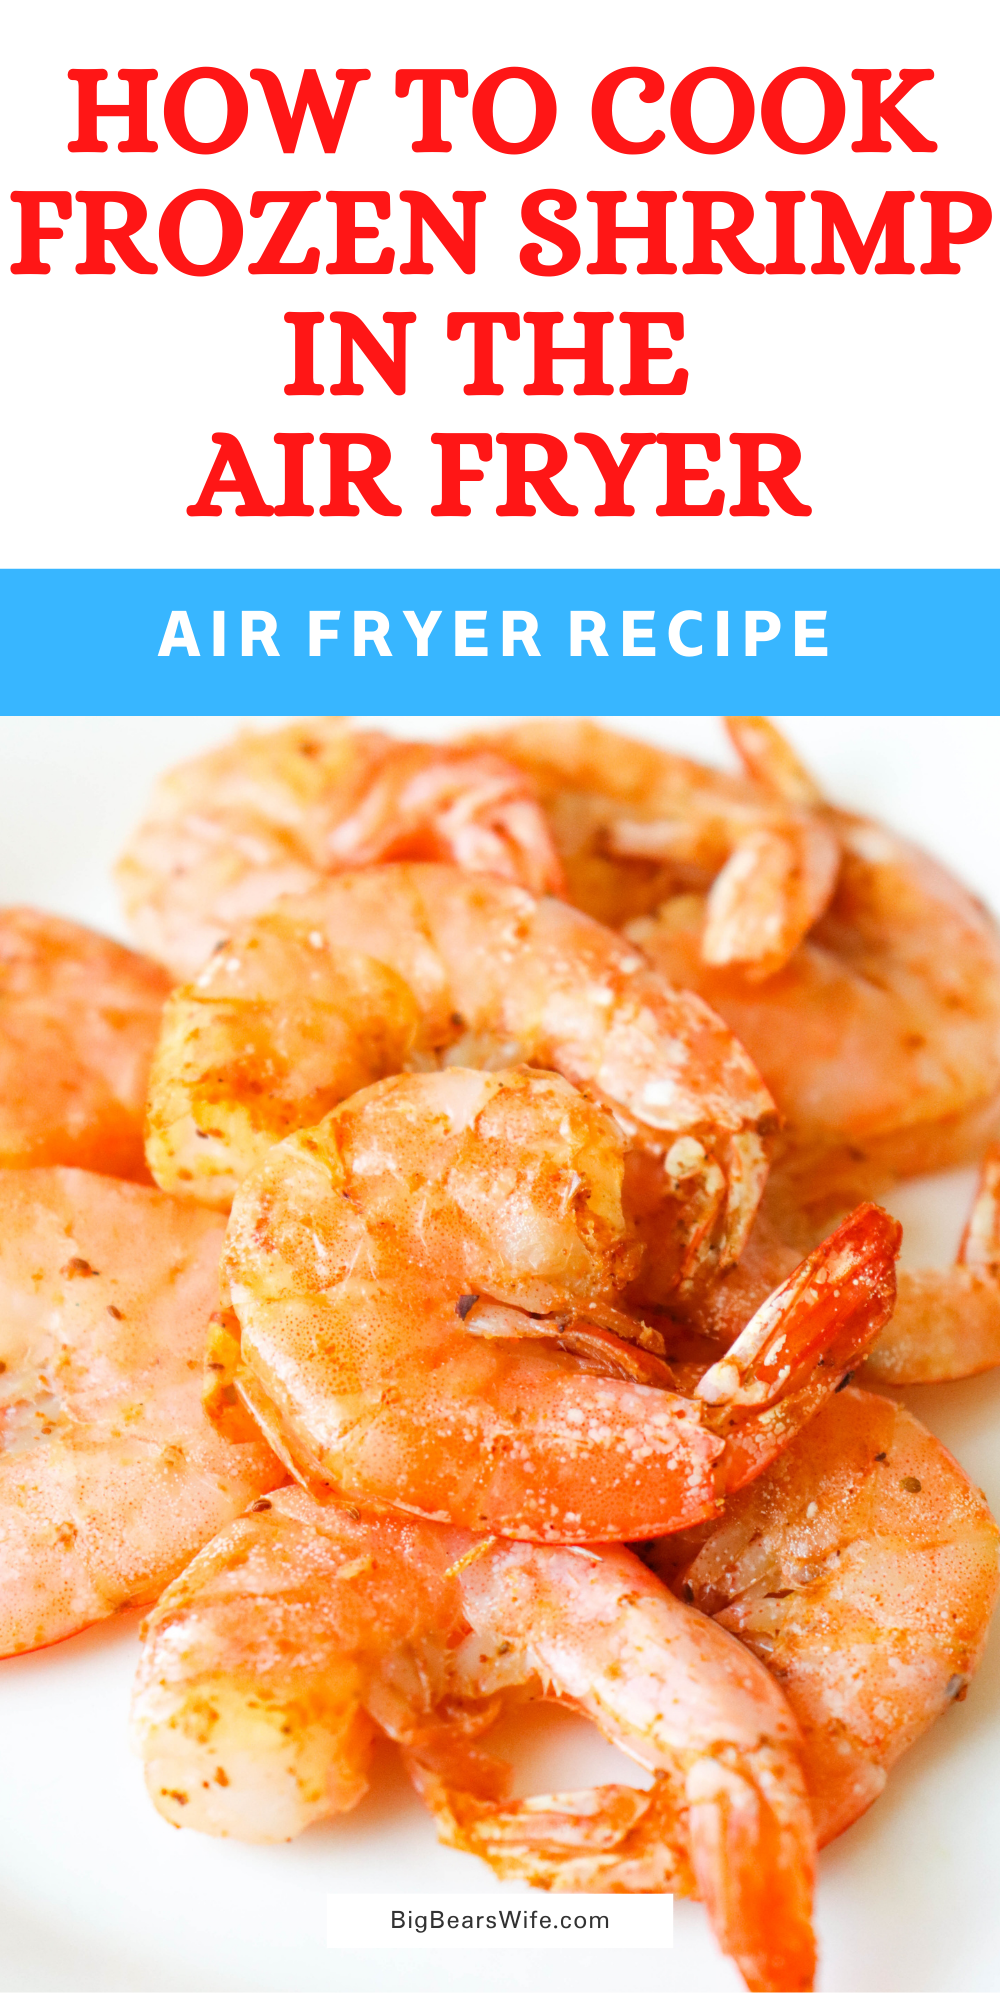 Have you ever wanted to cook Shrimp in the air fryer? This is How to cook Frozen Shrimp in the Air Fryer so that it turns out delicious every time! I'll also show you how NOT to cook it!  via @bigbearswife